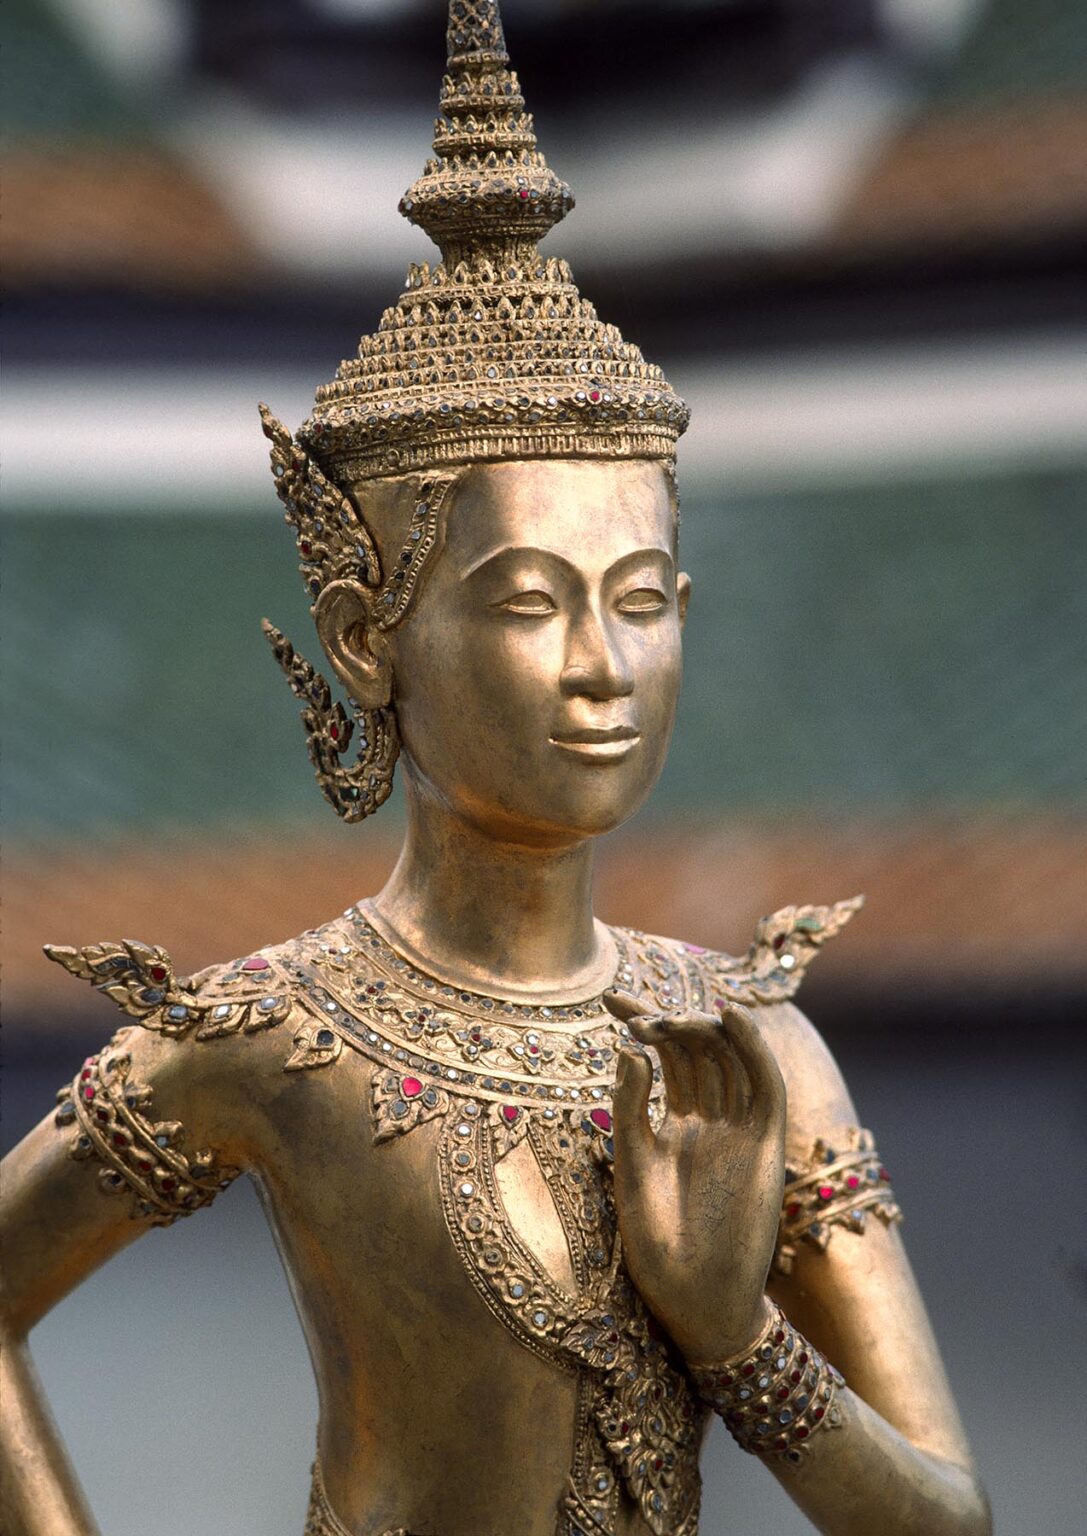 Statue of a BUDDHIST GODDESS at WAT PHRA KEO which is part of the GRAND PALACE complex - BANGKOK, THAILAND